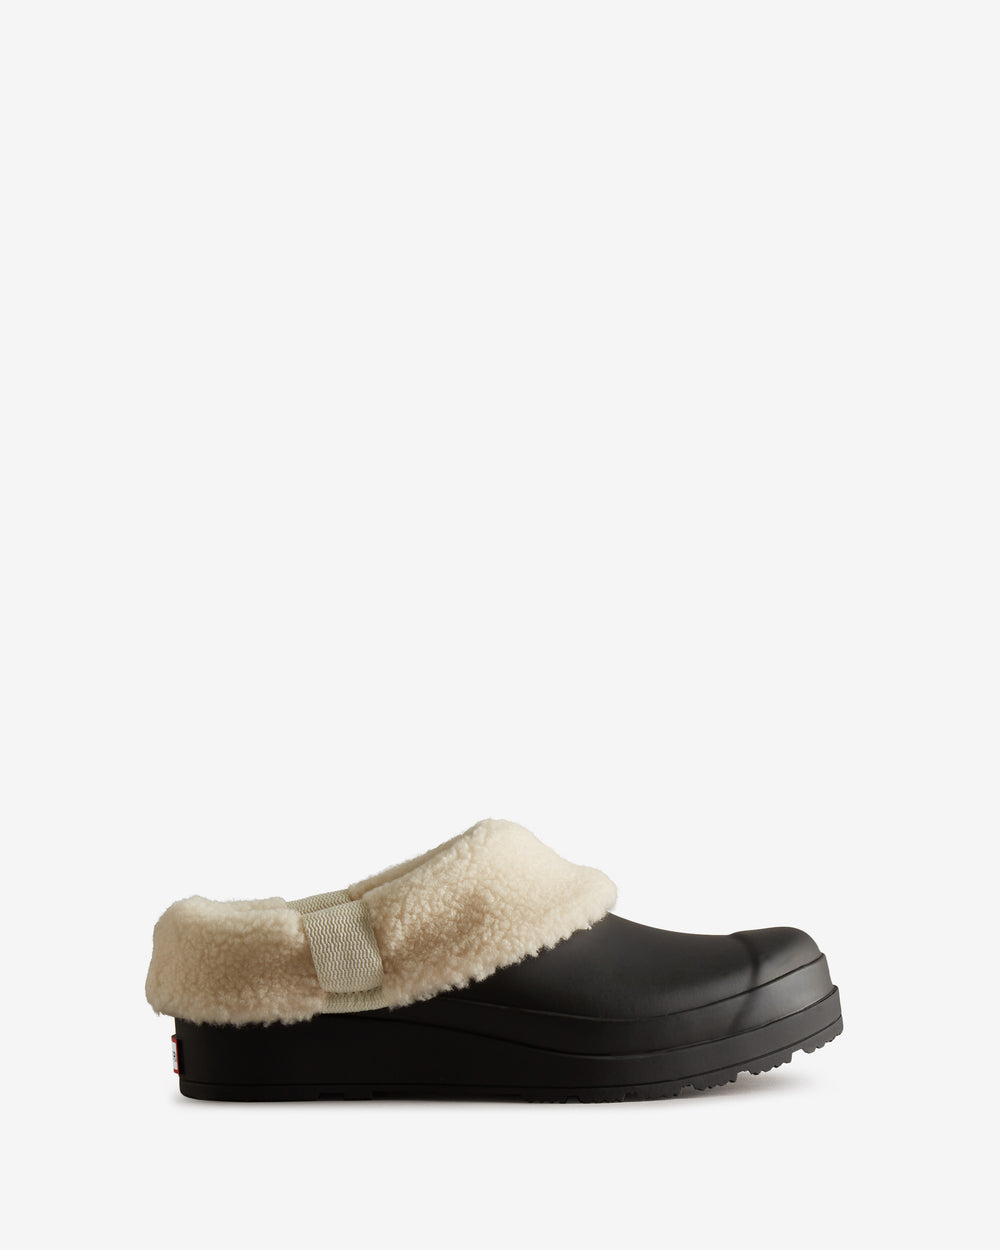 Women's Play Shearling Insulated Clogs